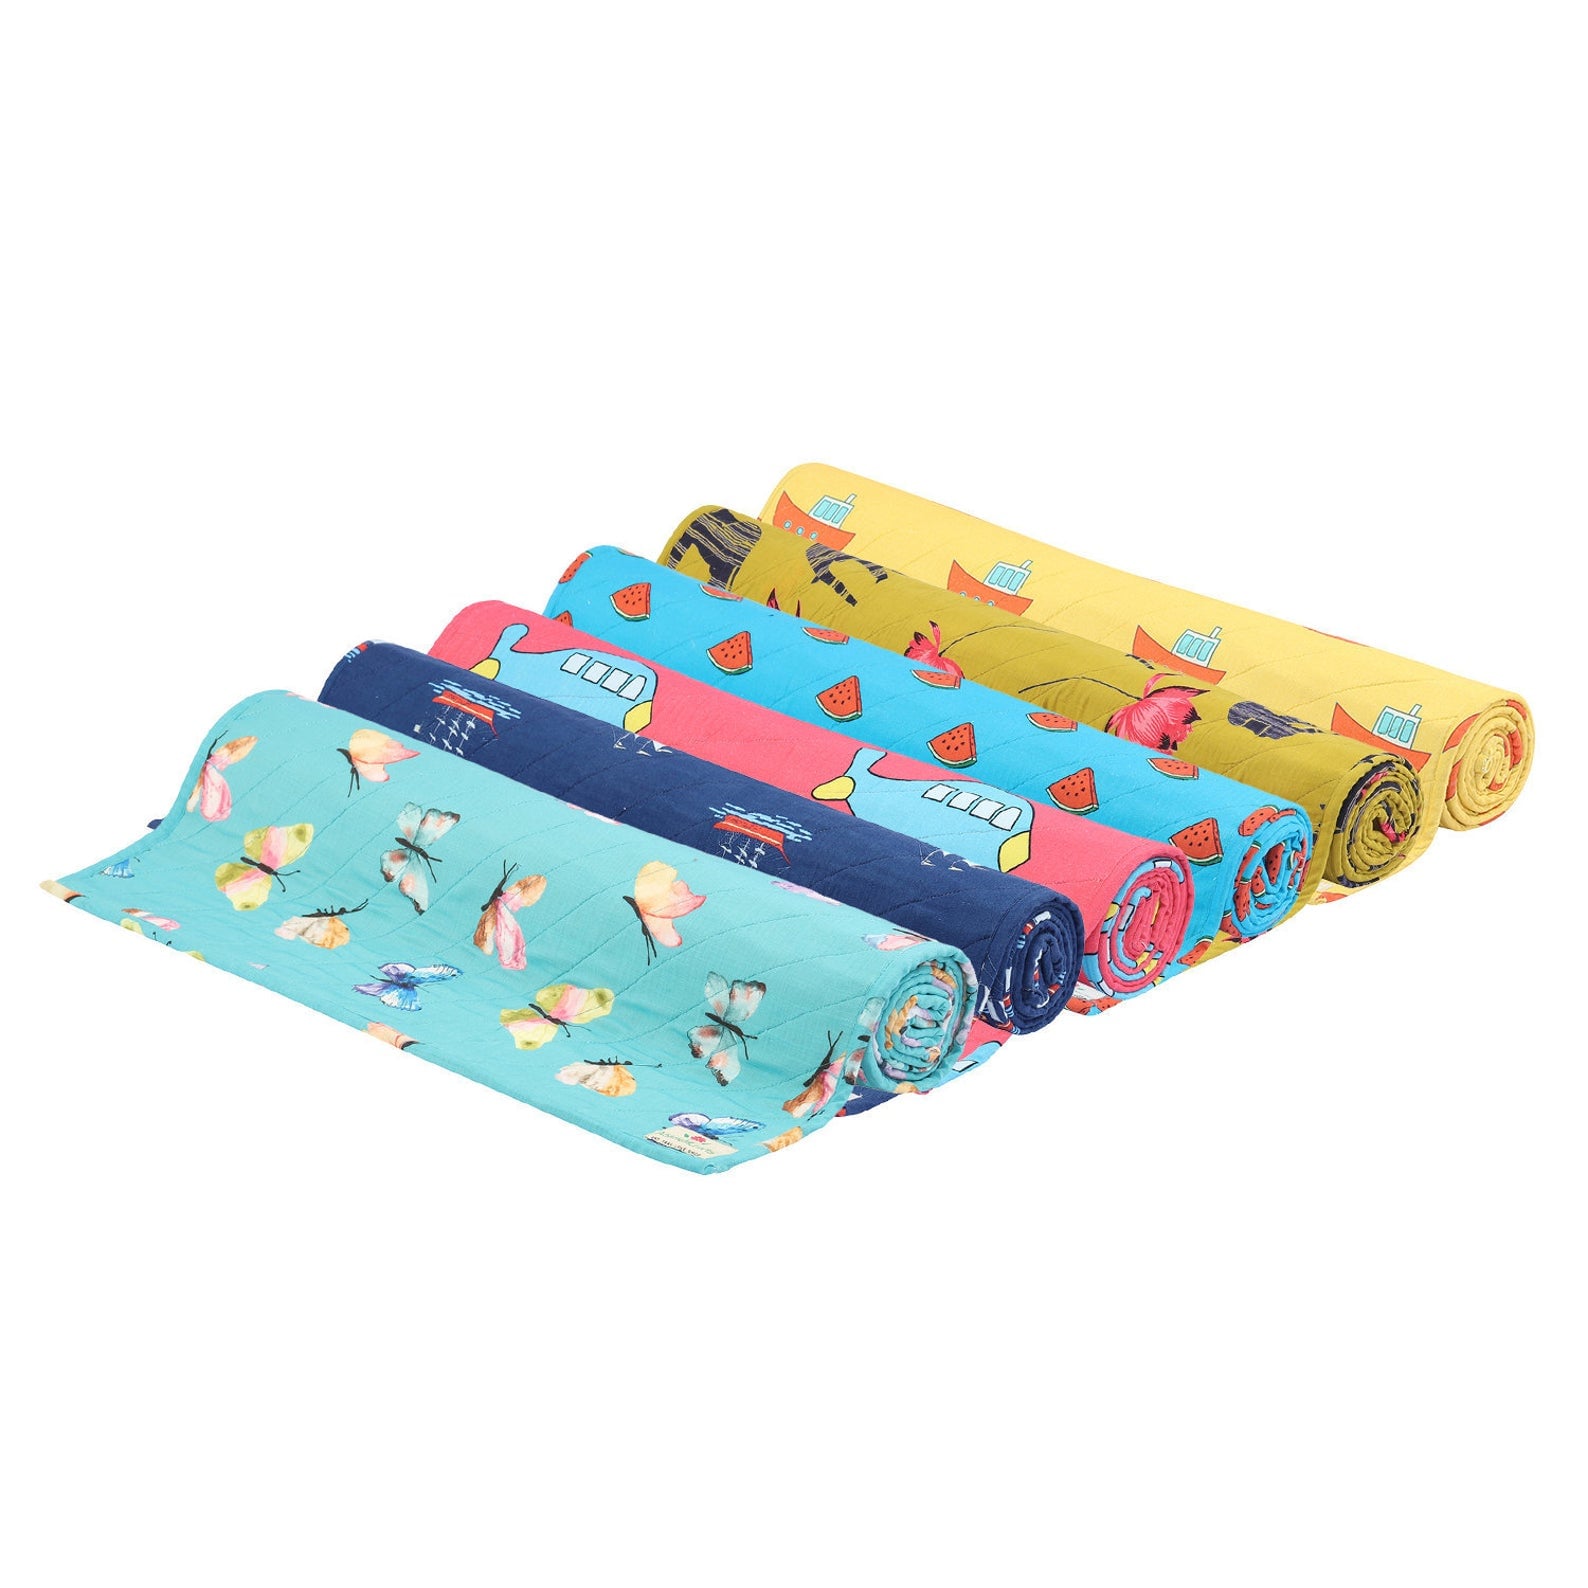 YOGALETTE KiddoMat Childrens YogaMat in 3 Colors